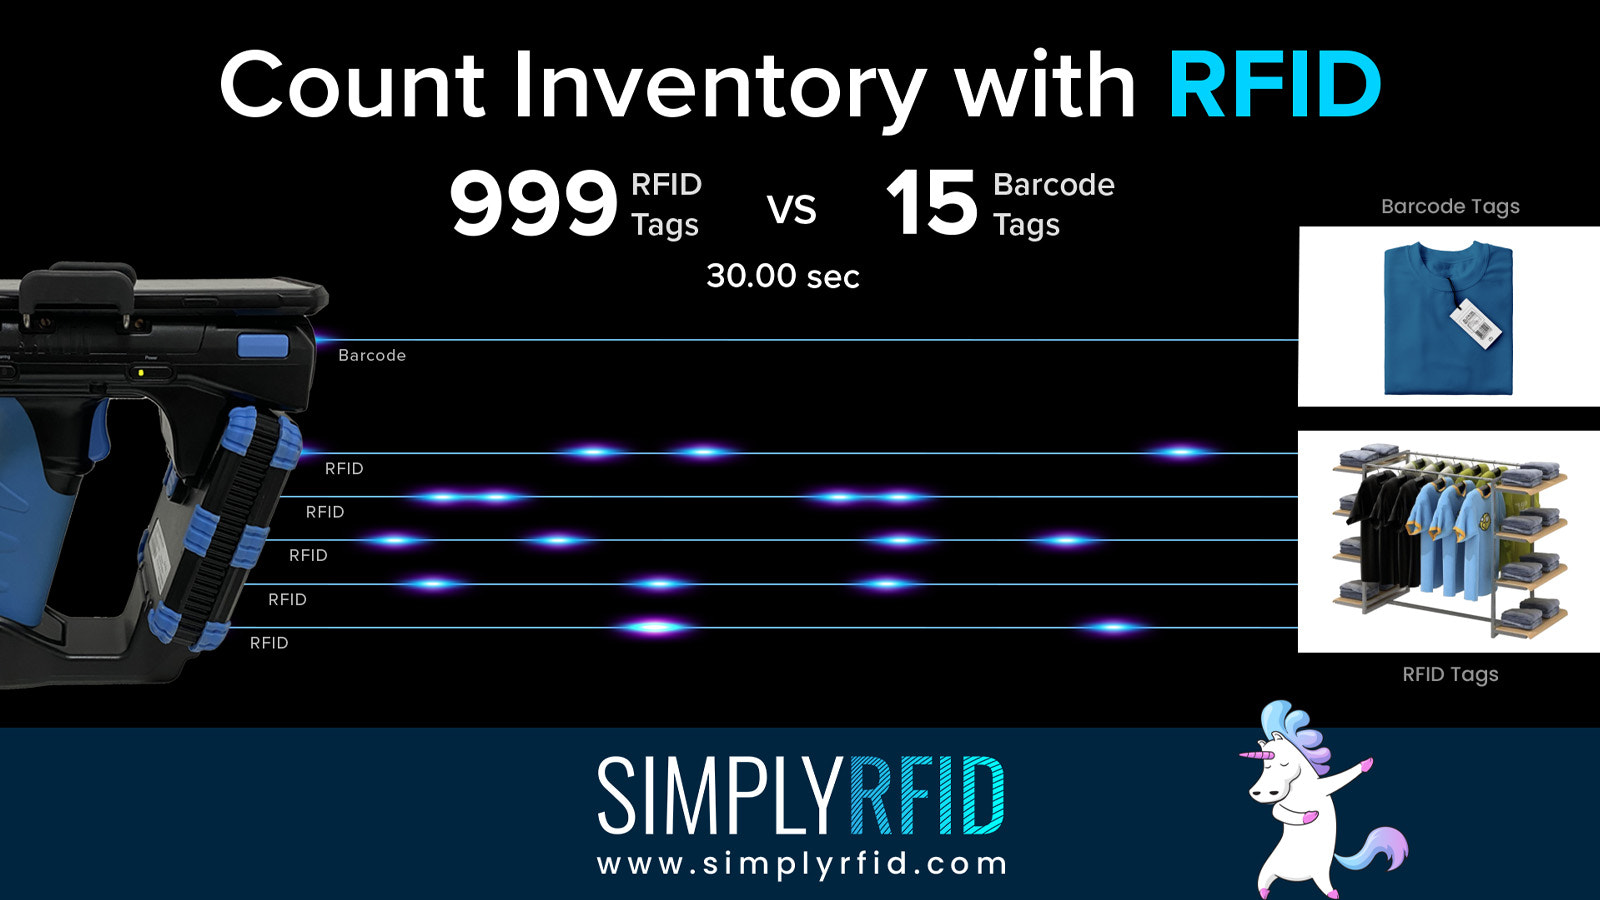 Count inventory with RFID